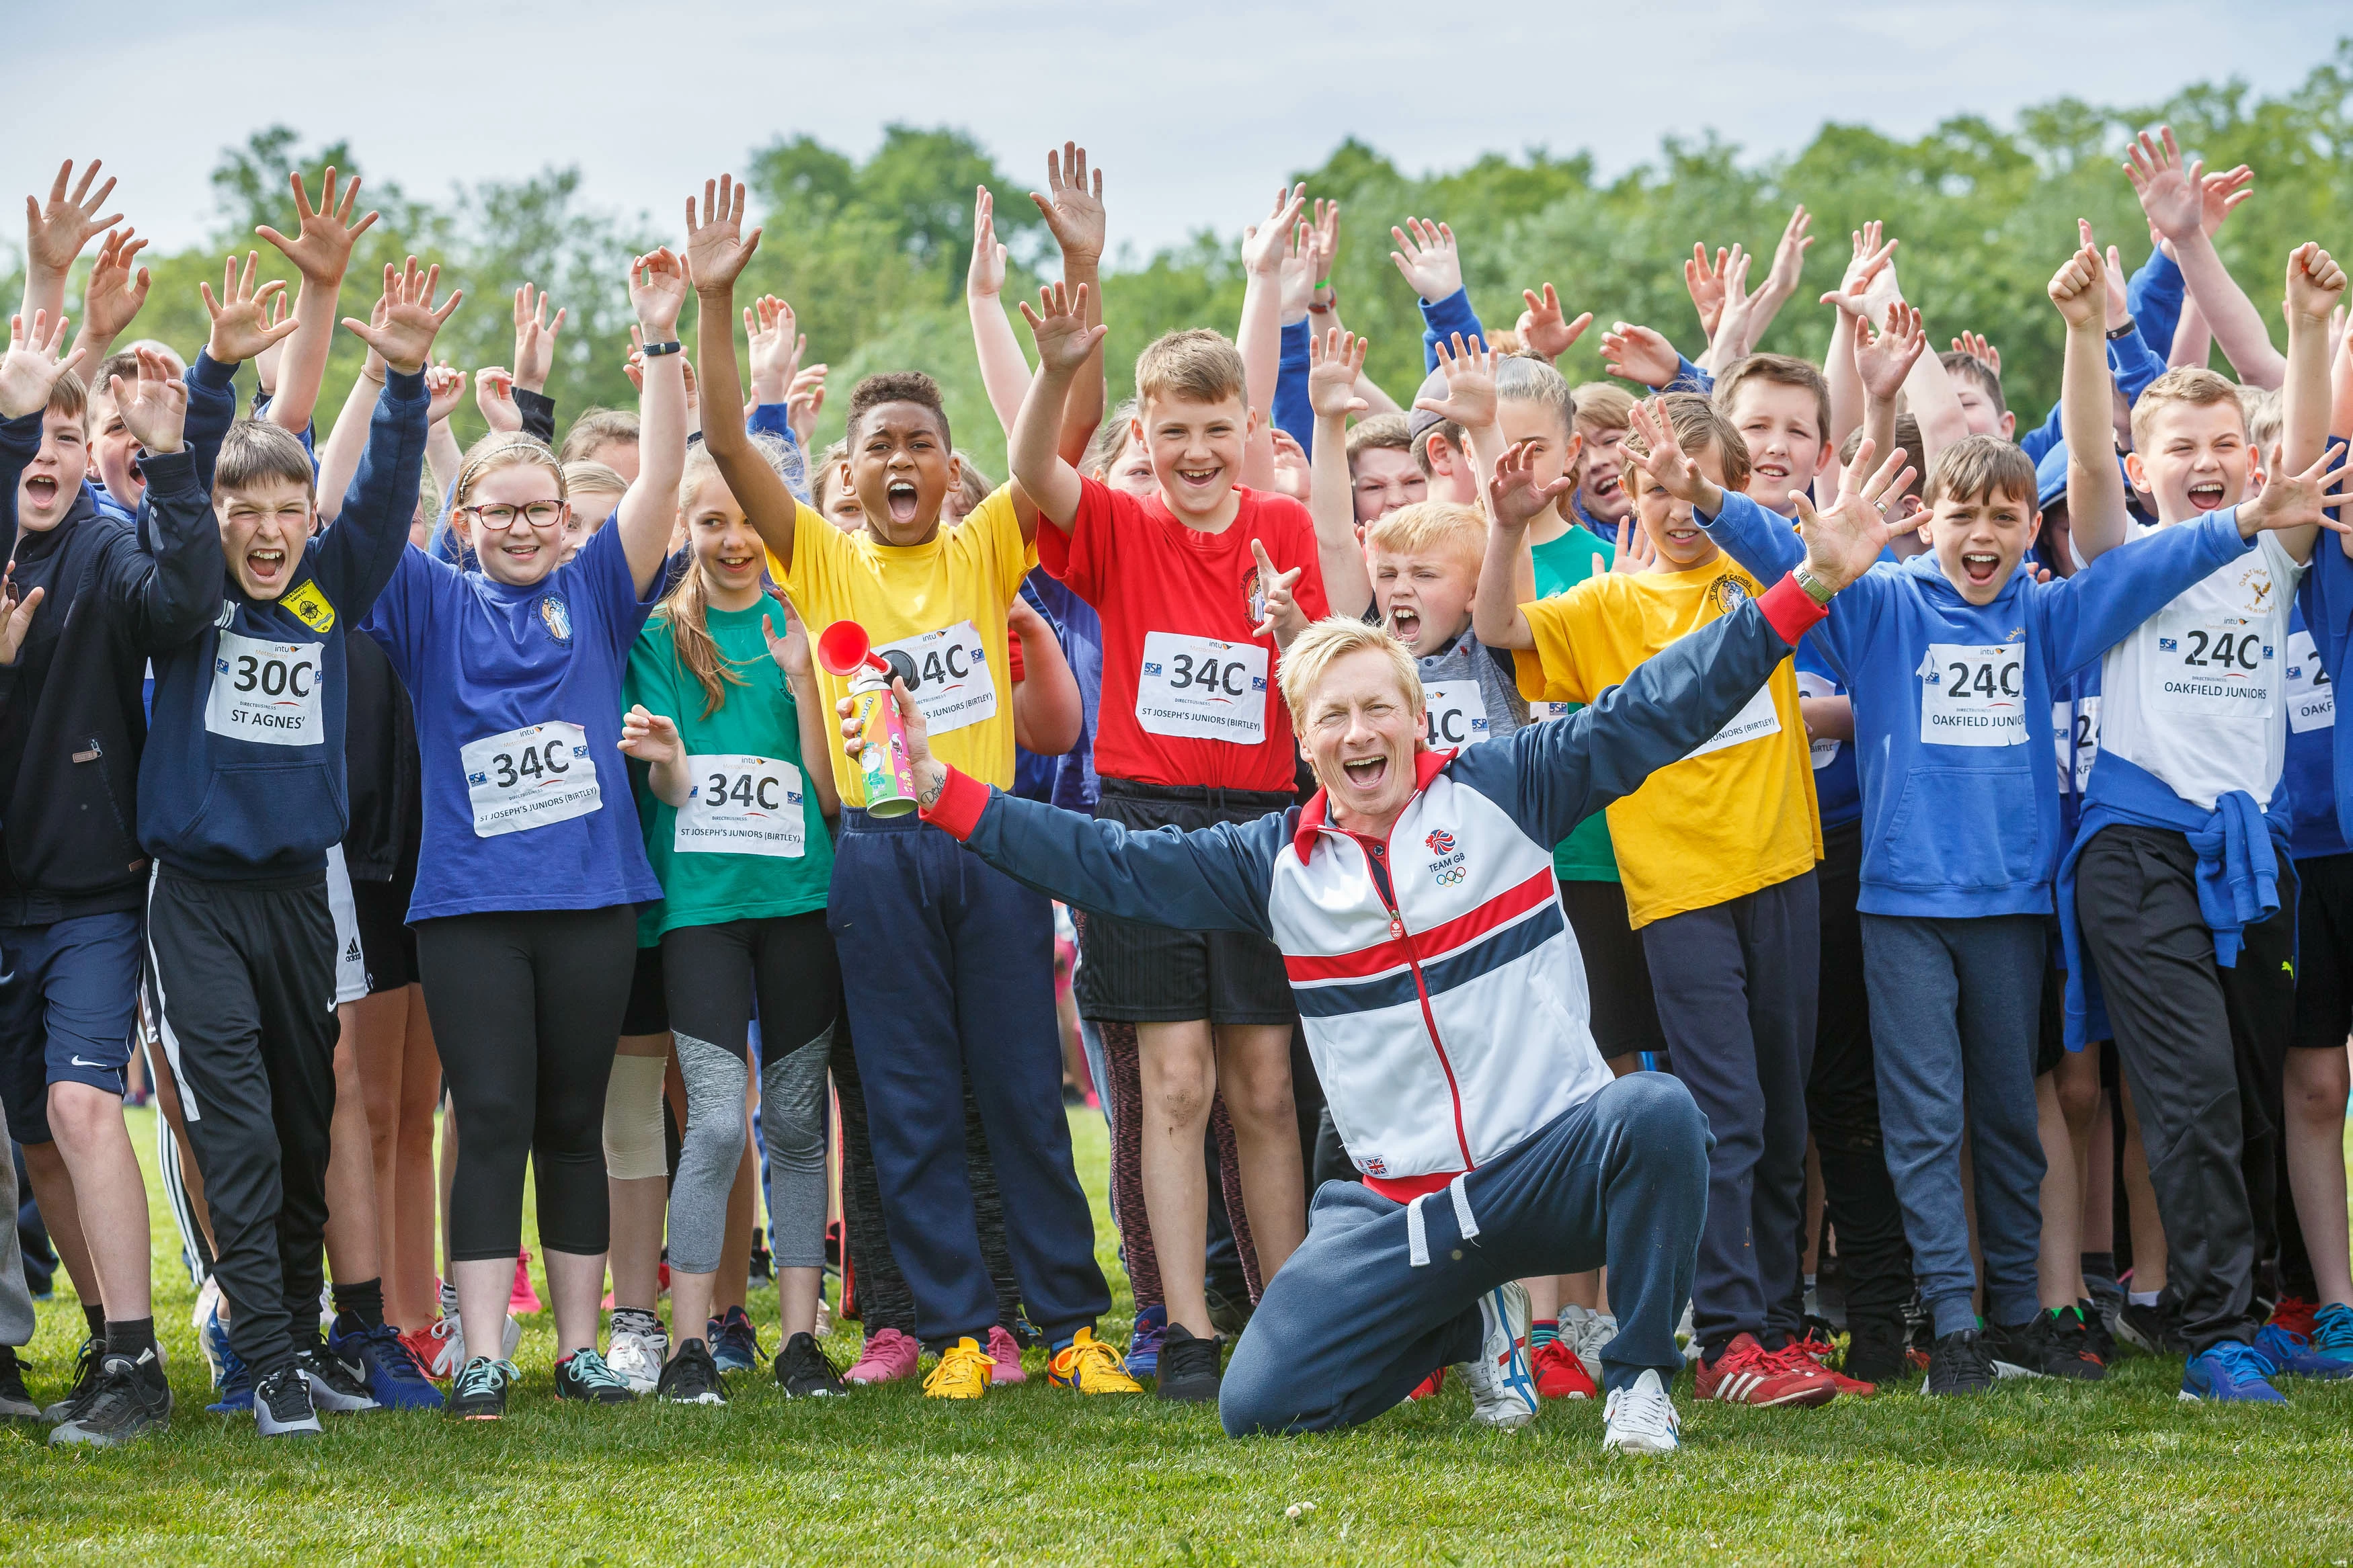 Craig Heap joins in the fun with runners